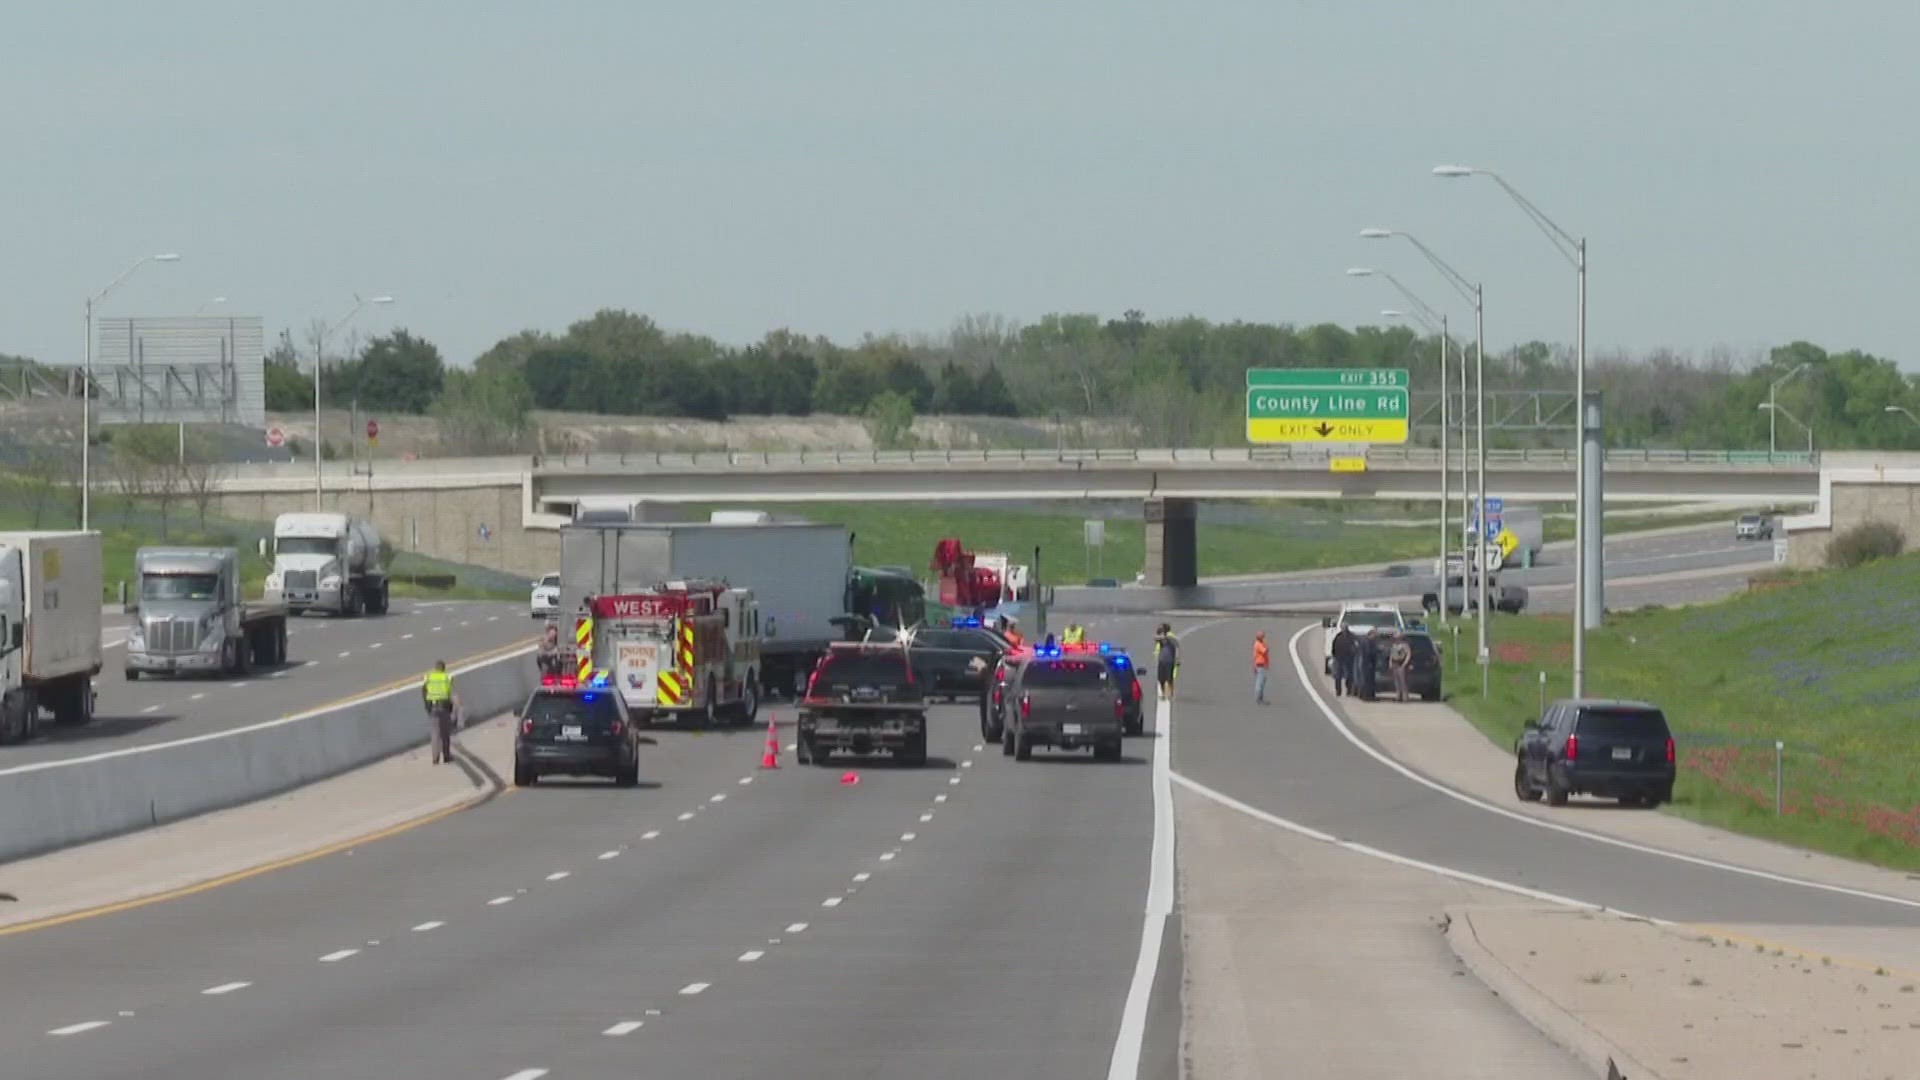 A DPS spokesman said a semi-truck ran into a fire truck and two patrol units that were on the side of the road. Two DPS troopers were also injured.